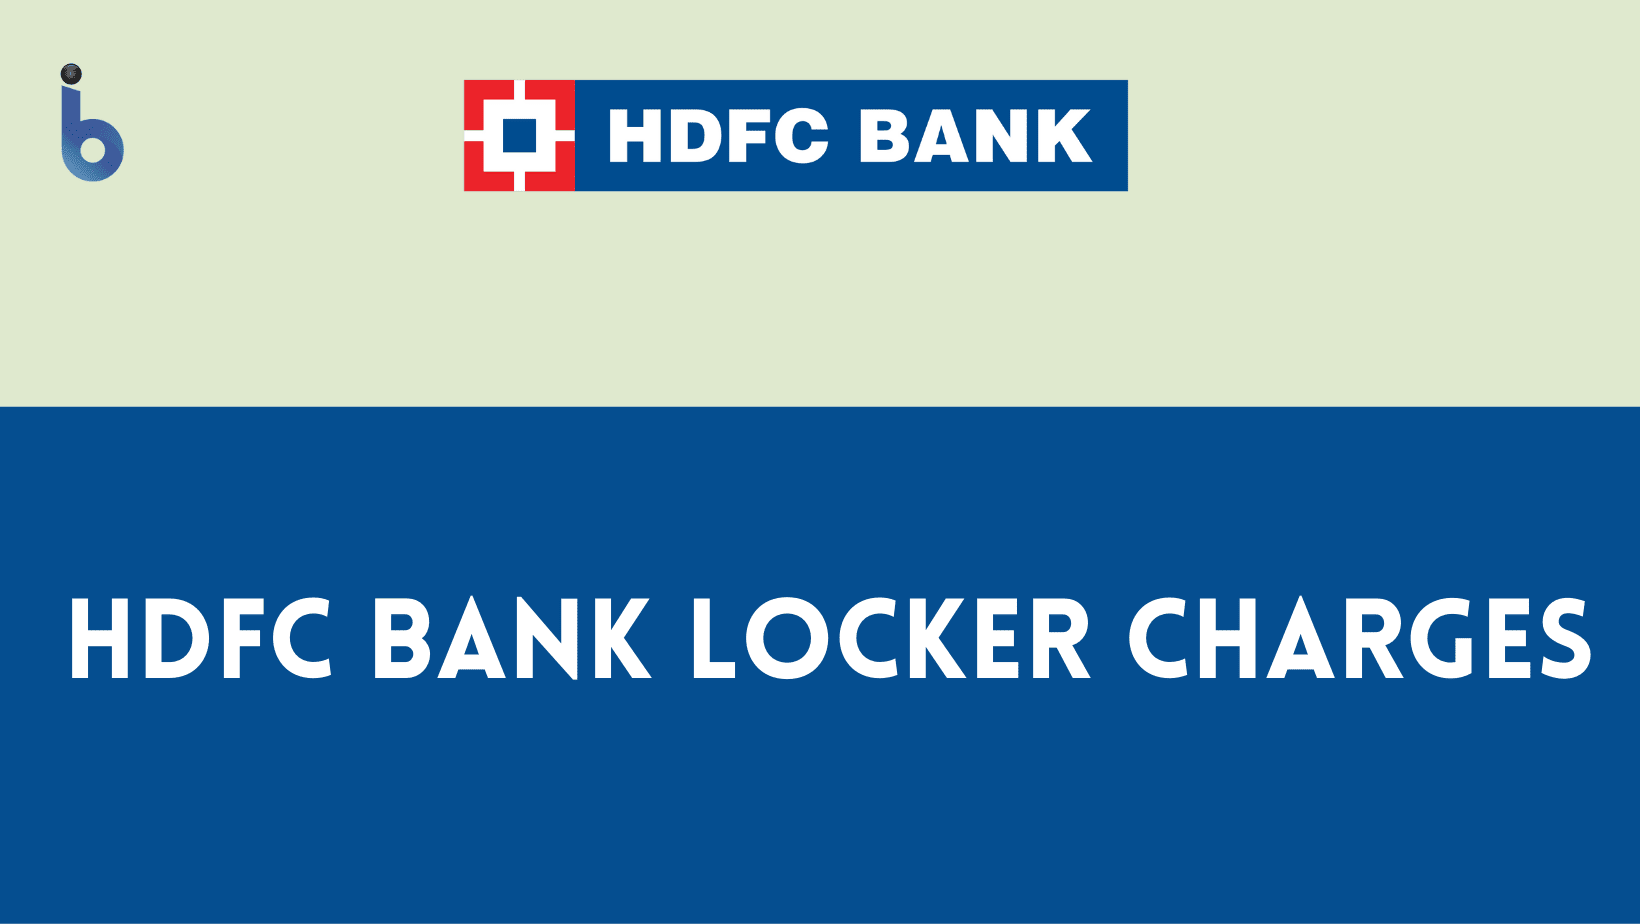 HDFC Bank Locker Charges